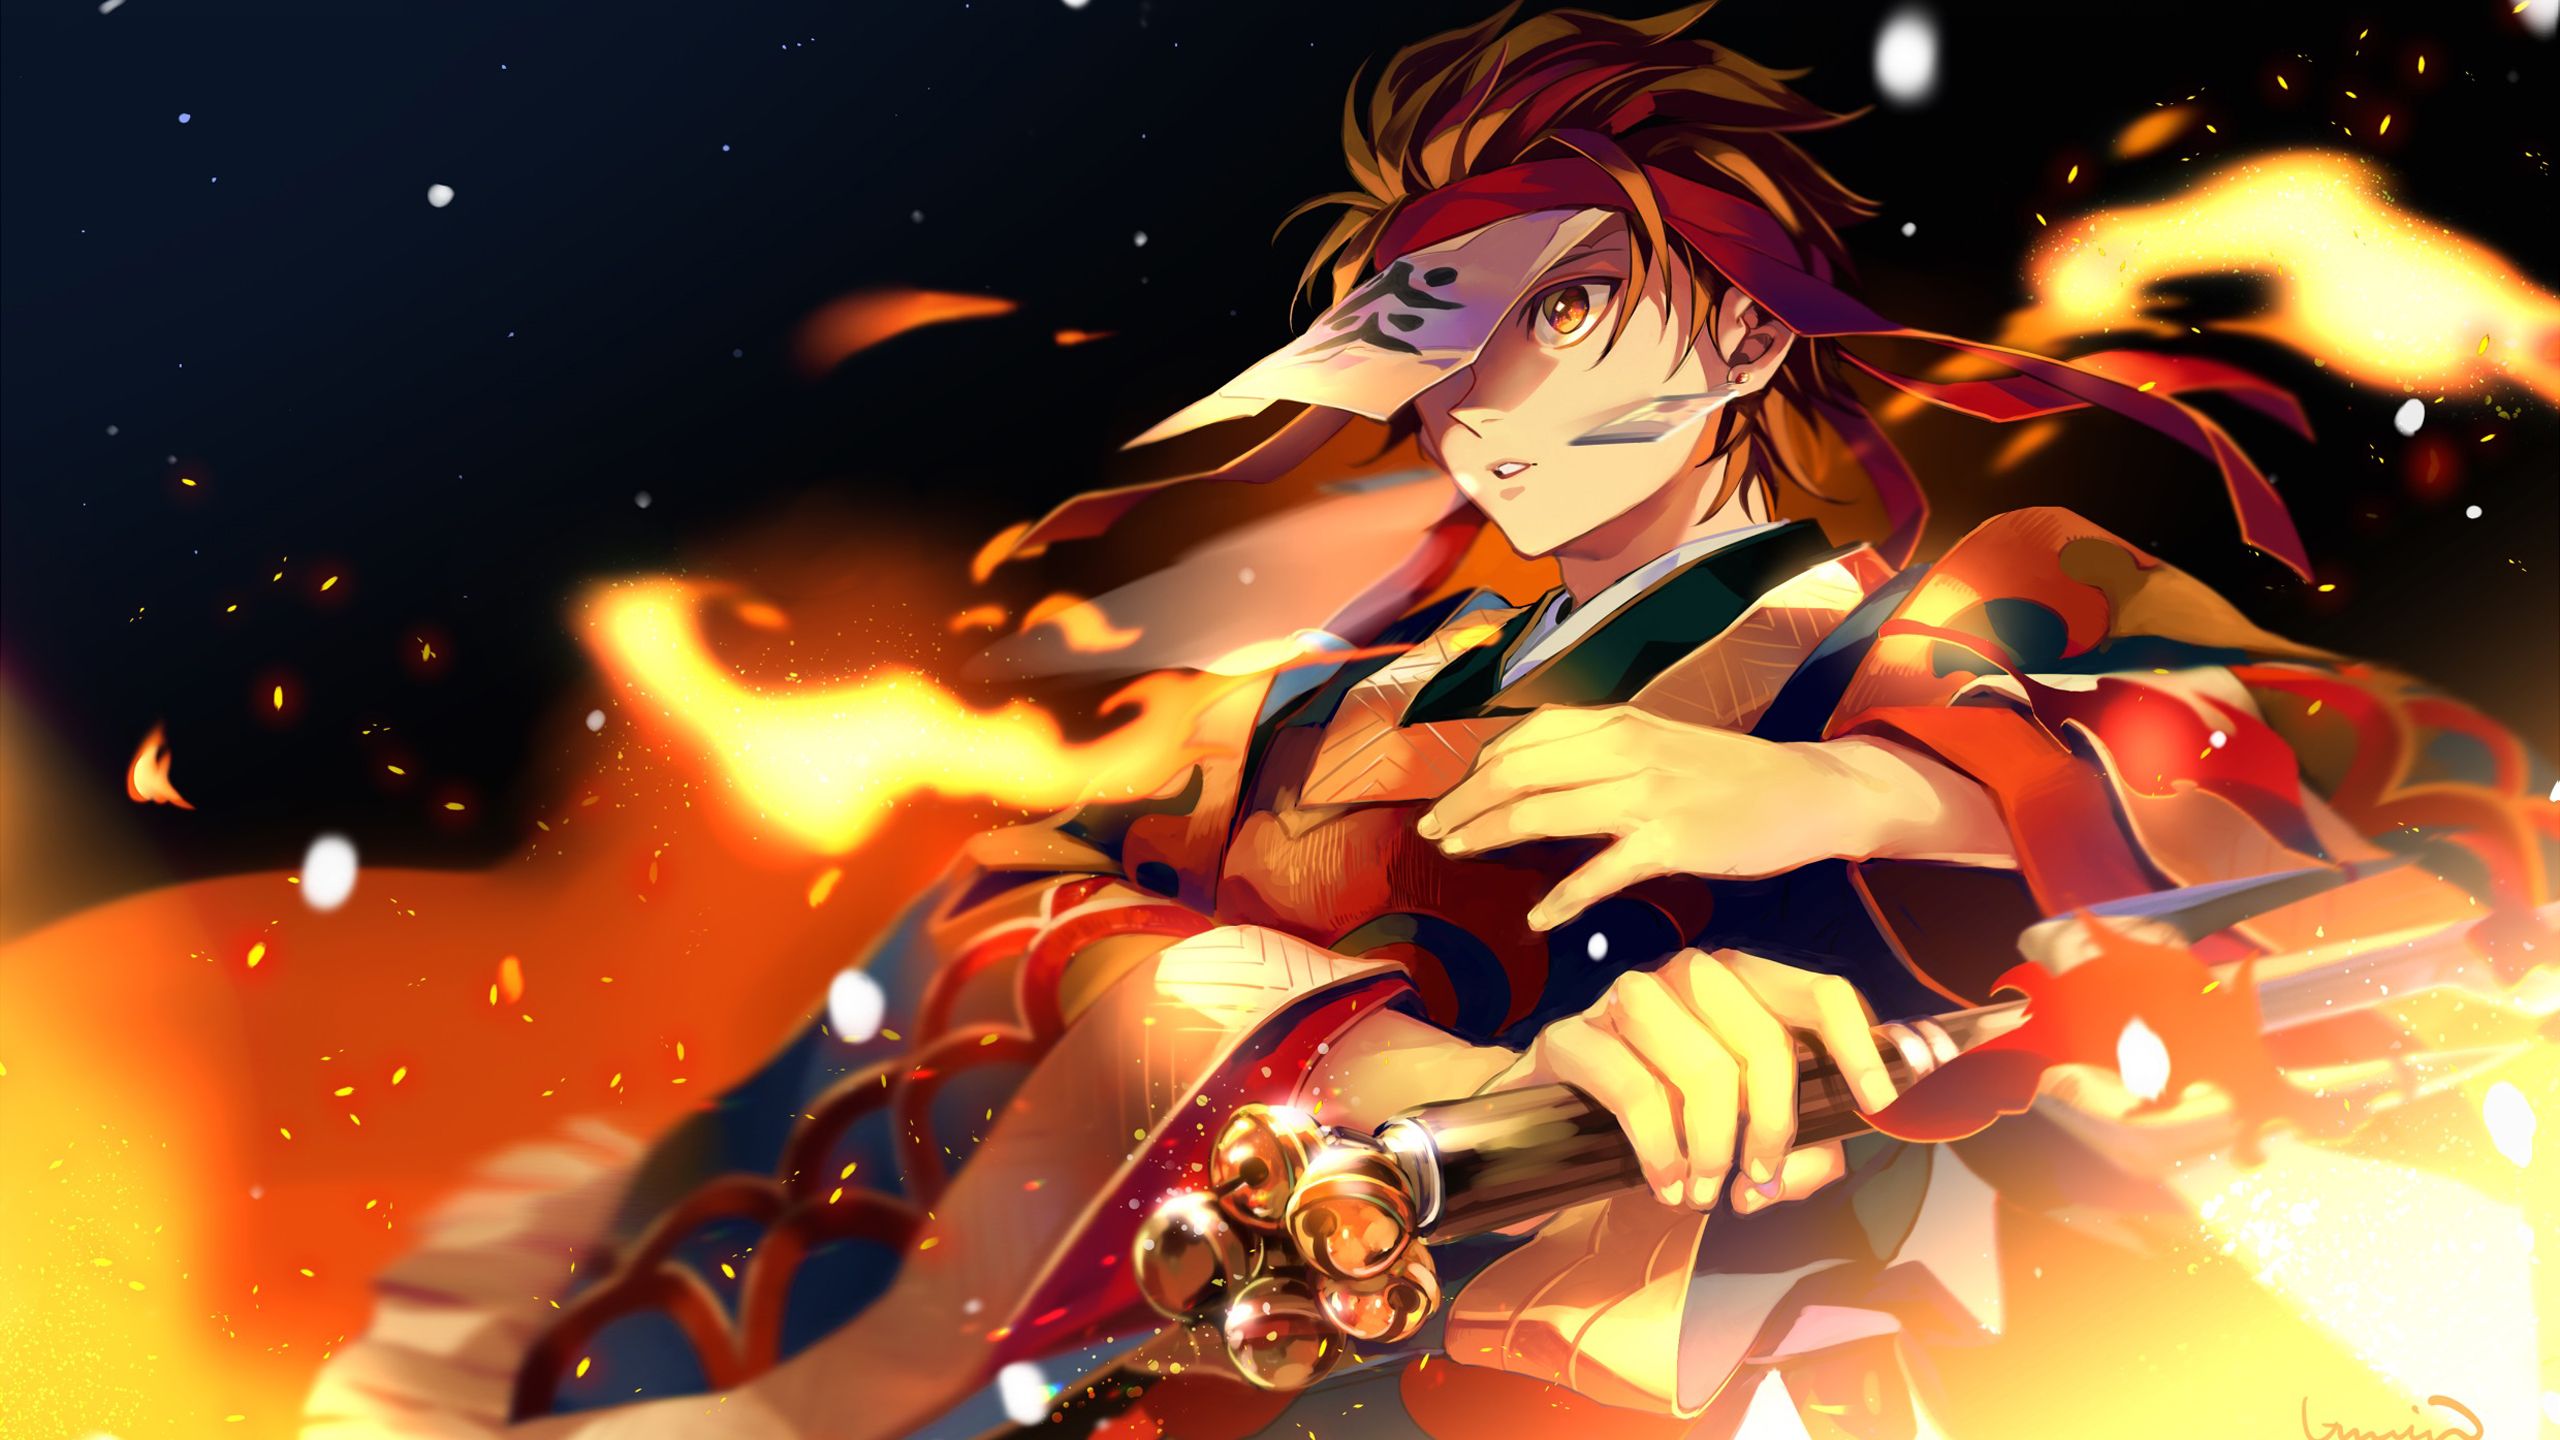 Demon Slayer Tanjiro Kamado With Sword With Black Background And Sparks HD Anime Wallpaper